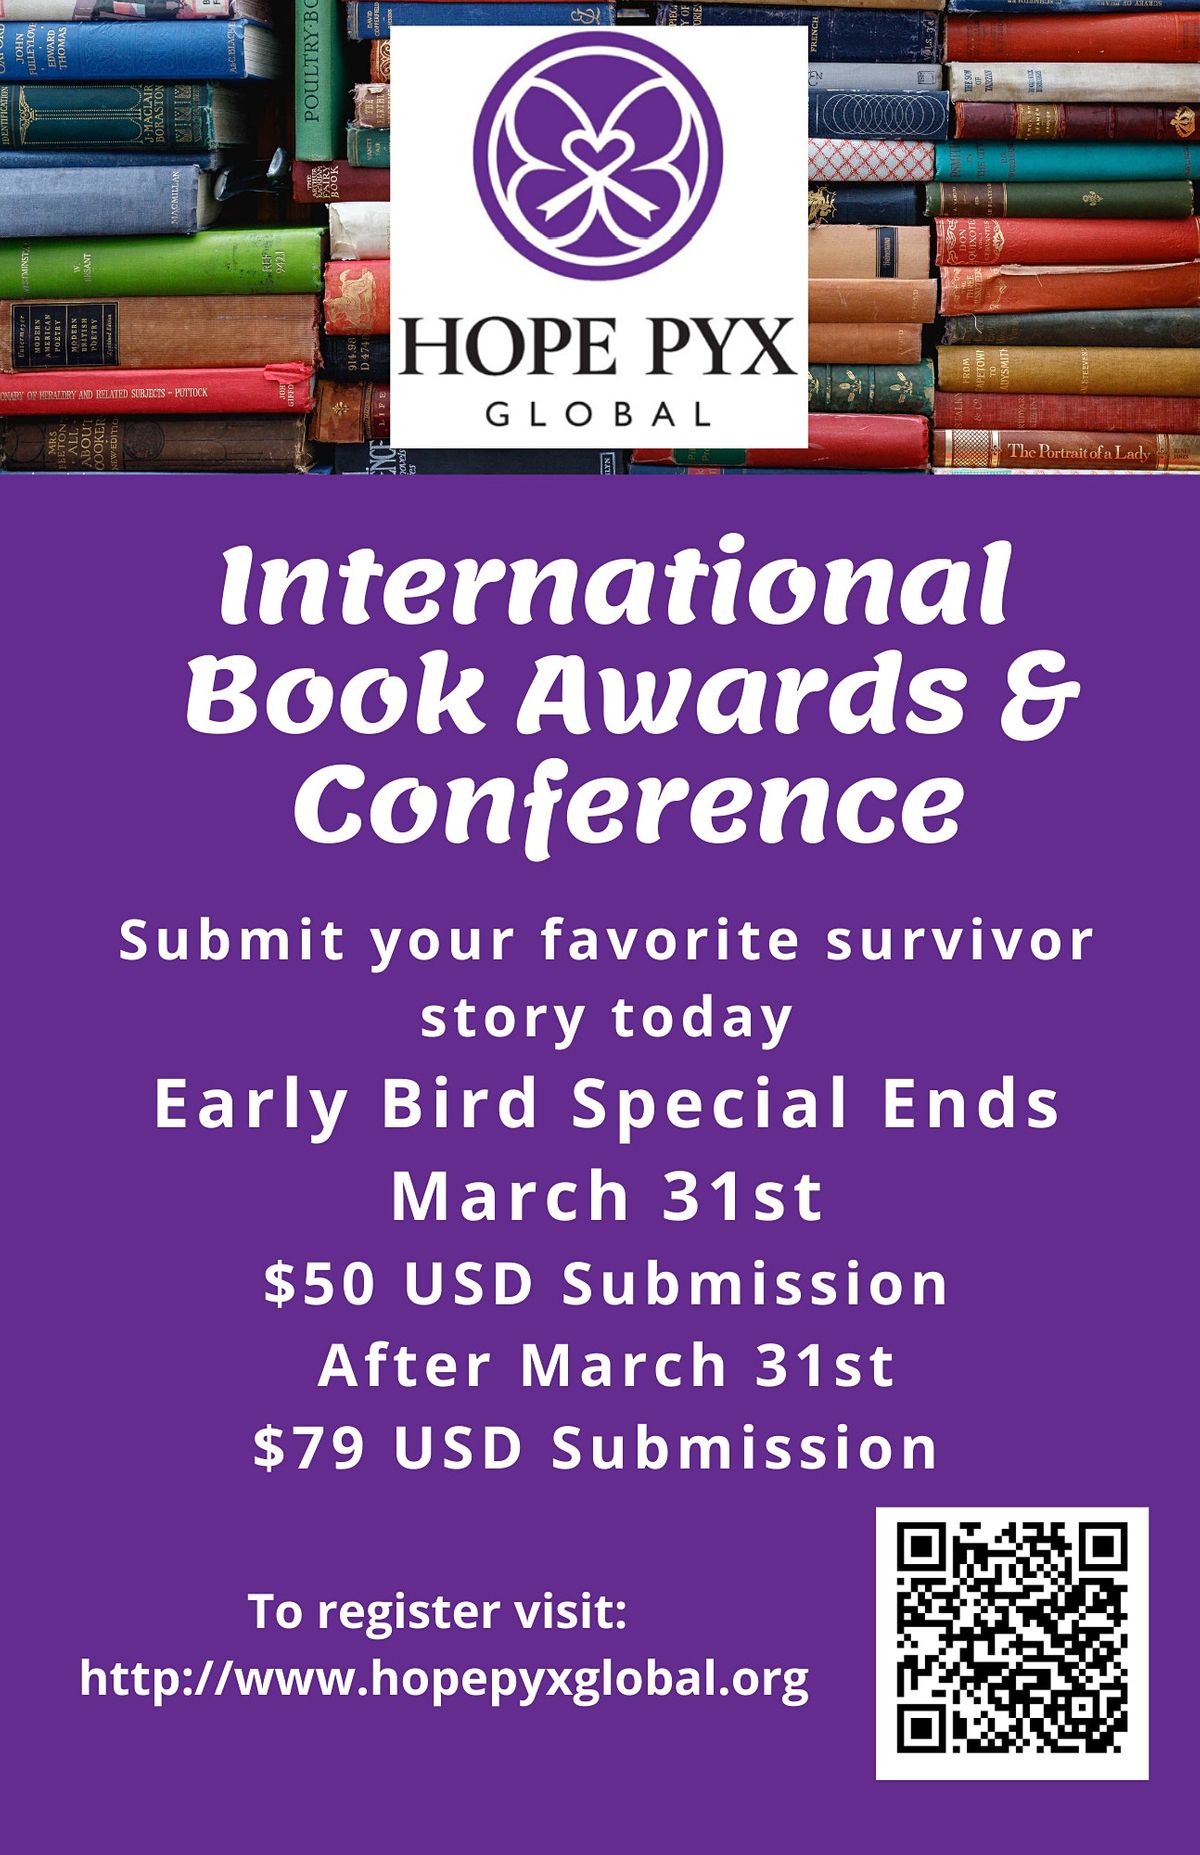 Hope Pyx Global International Book Awards and Conference